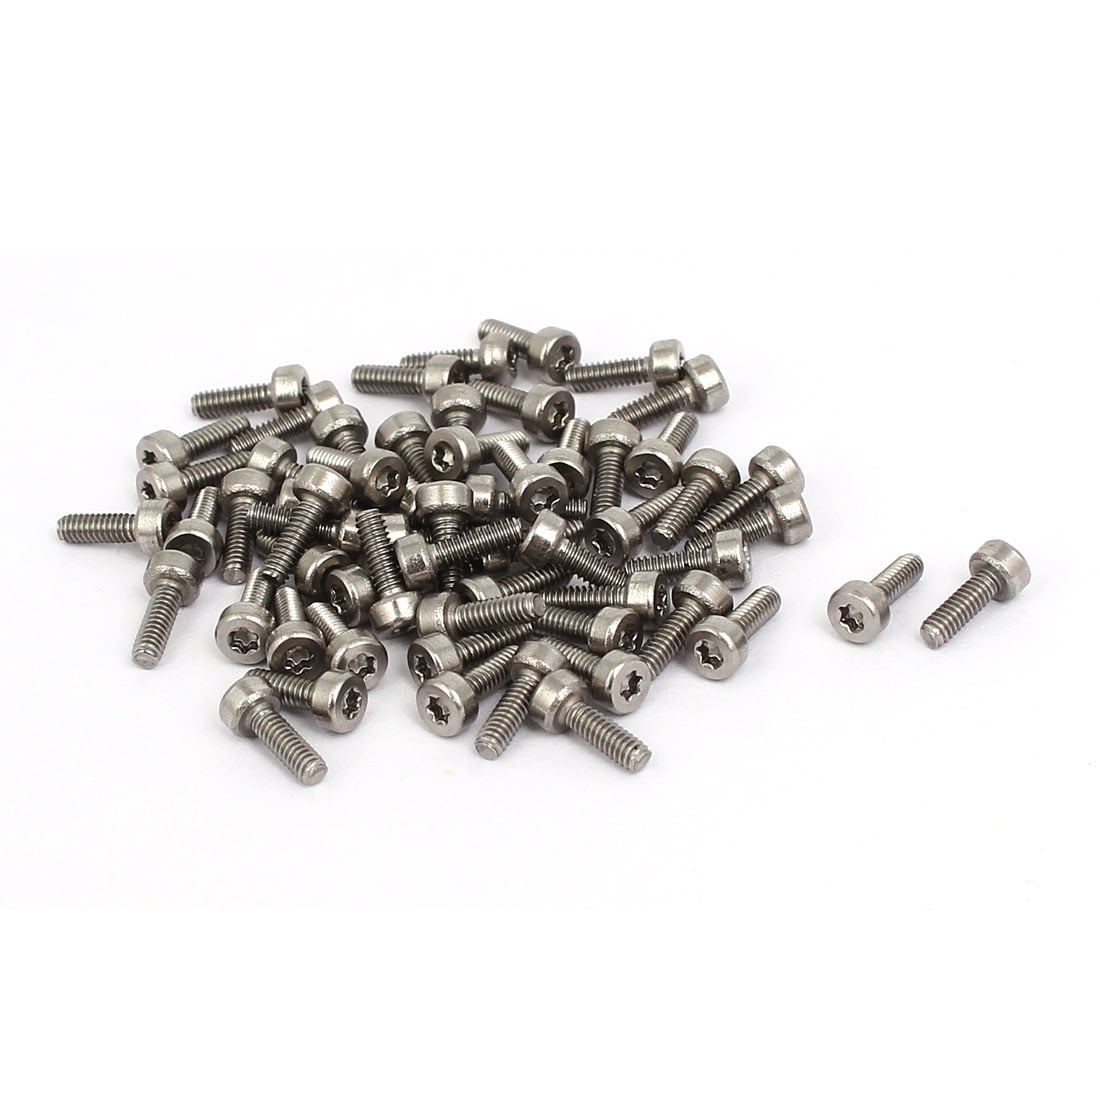 M6, Hex Bolts Head Mechanical Parts Combination Box ALLYER M6 304 Stainless Steel Nuts and Bolts Hex Flat Head Cap Bolts Screws Nuts Hexagon Socket Head Screw,Heavy Duty Hex Bolts Nuts Assortment 